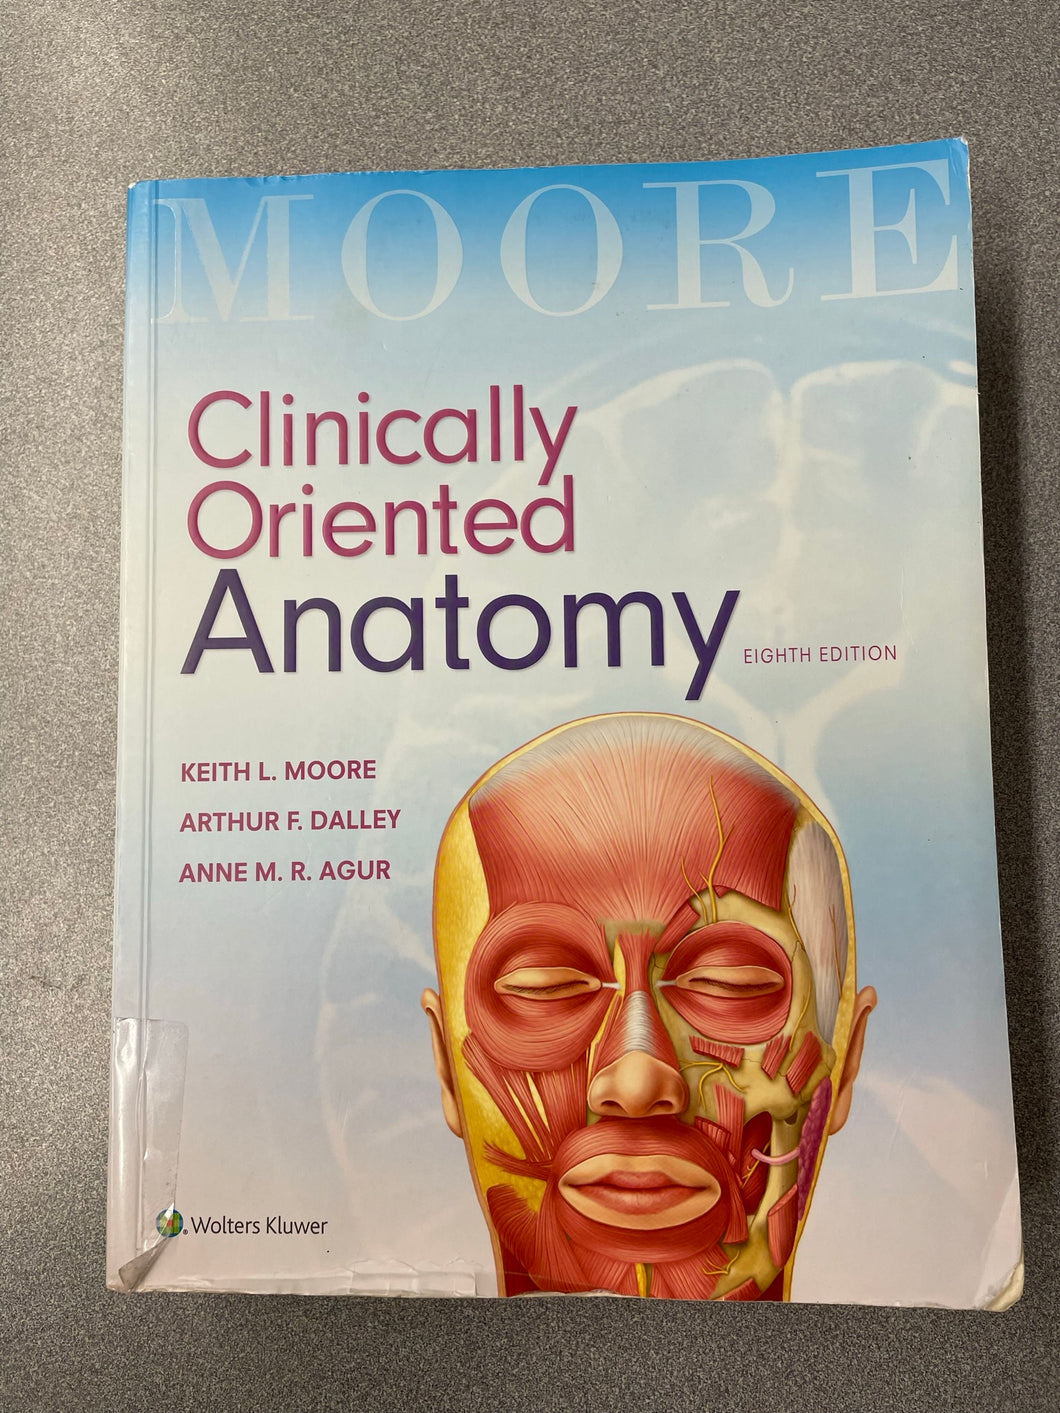 Clinically Oriented Anatomy 8th Edition, Moore, Keith L., et al. [2018] SN 5/23